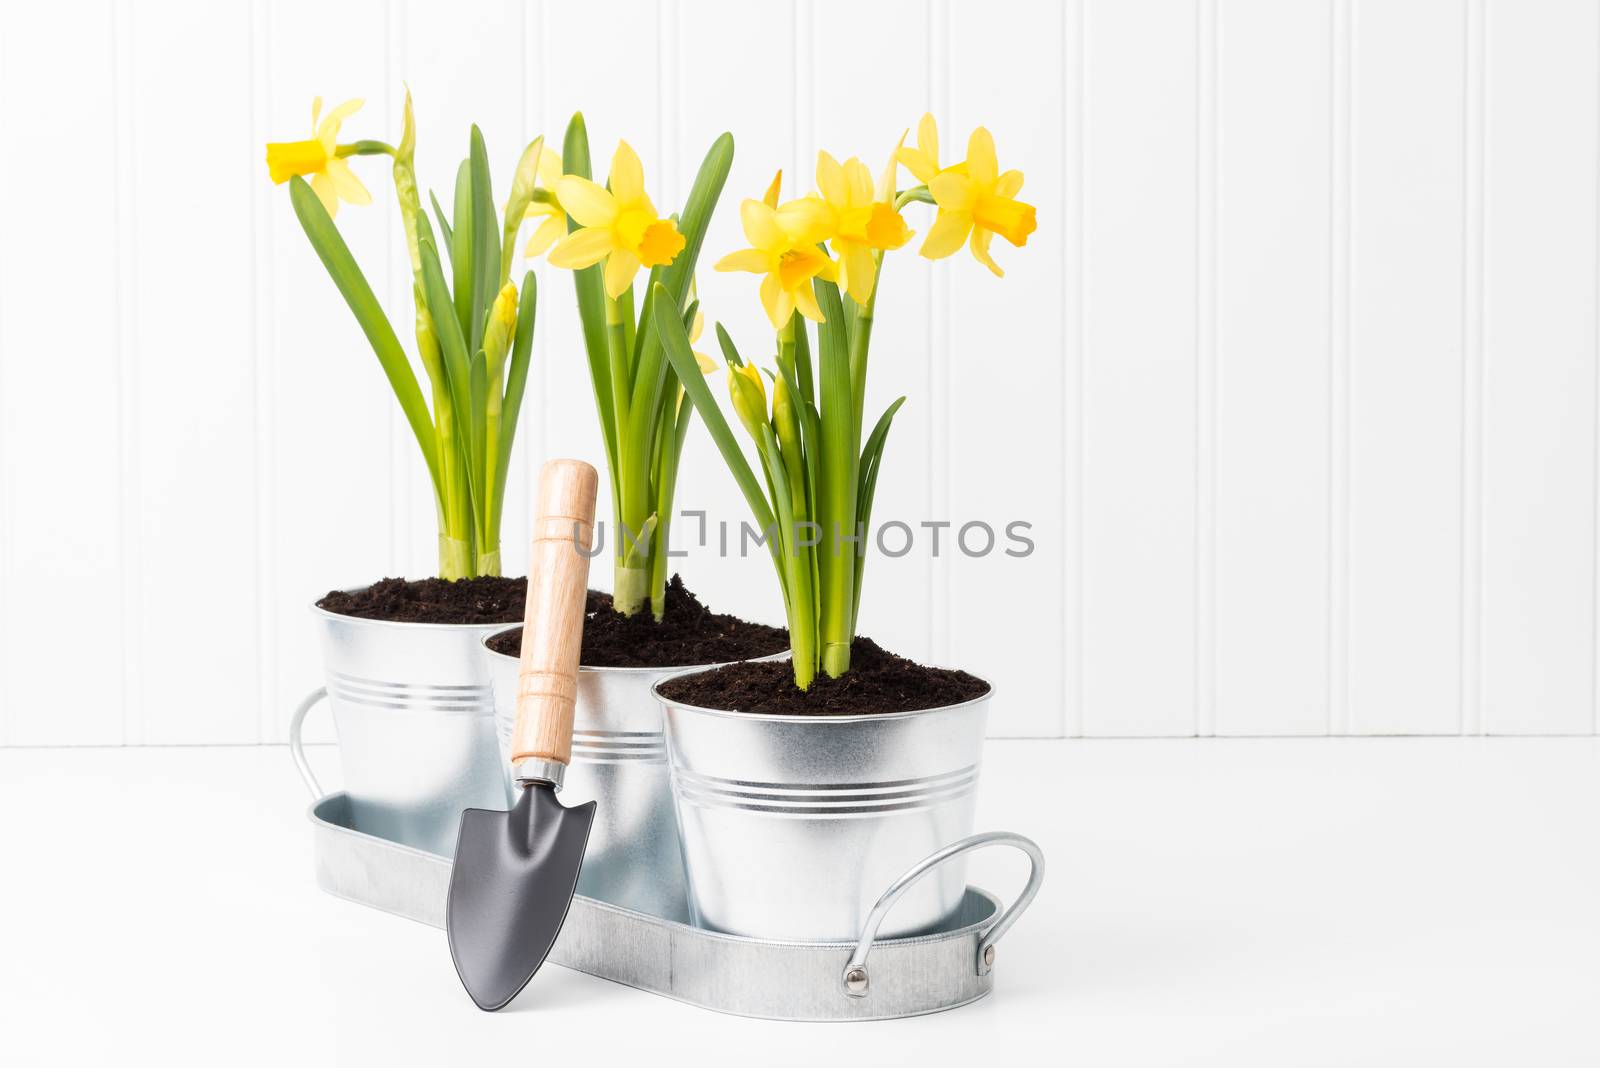 Daffodil Planter by billberryphotography